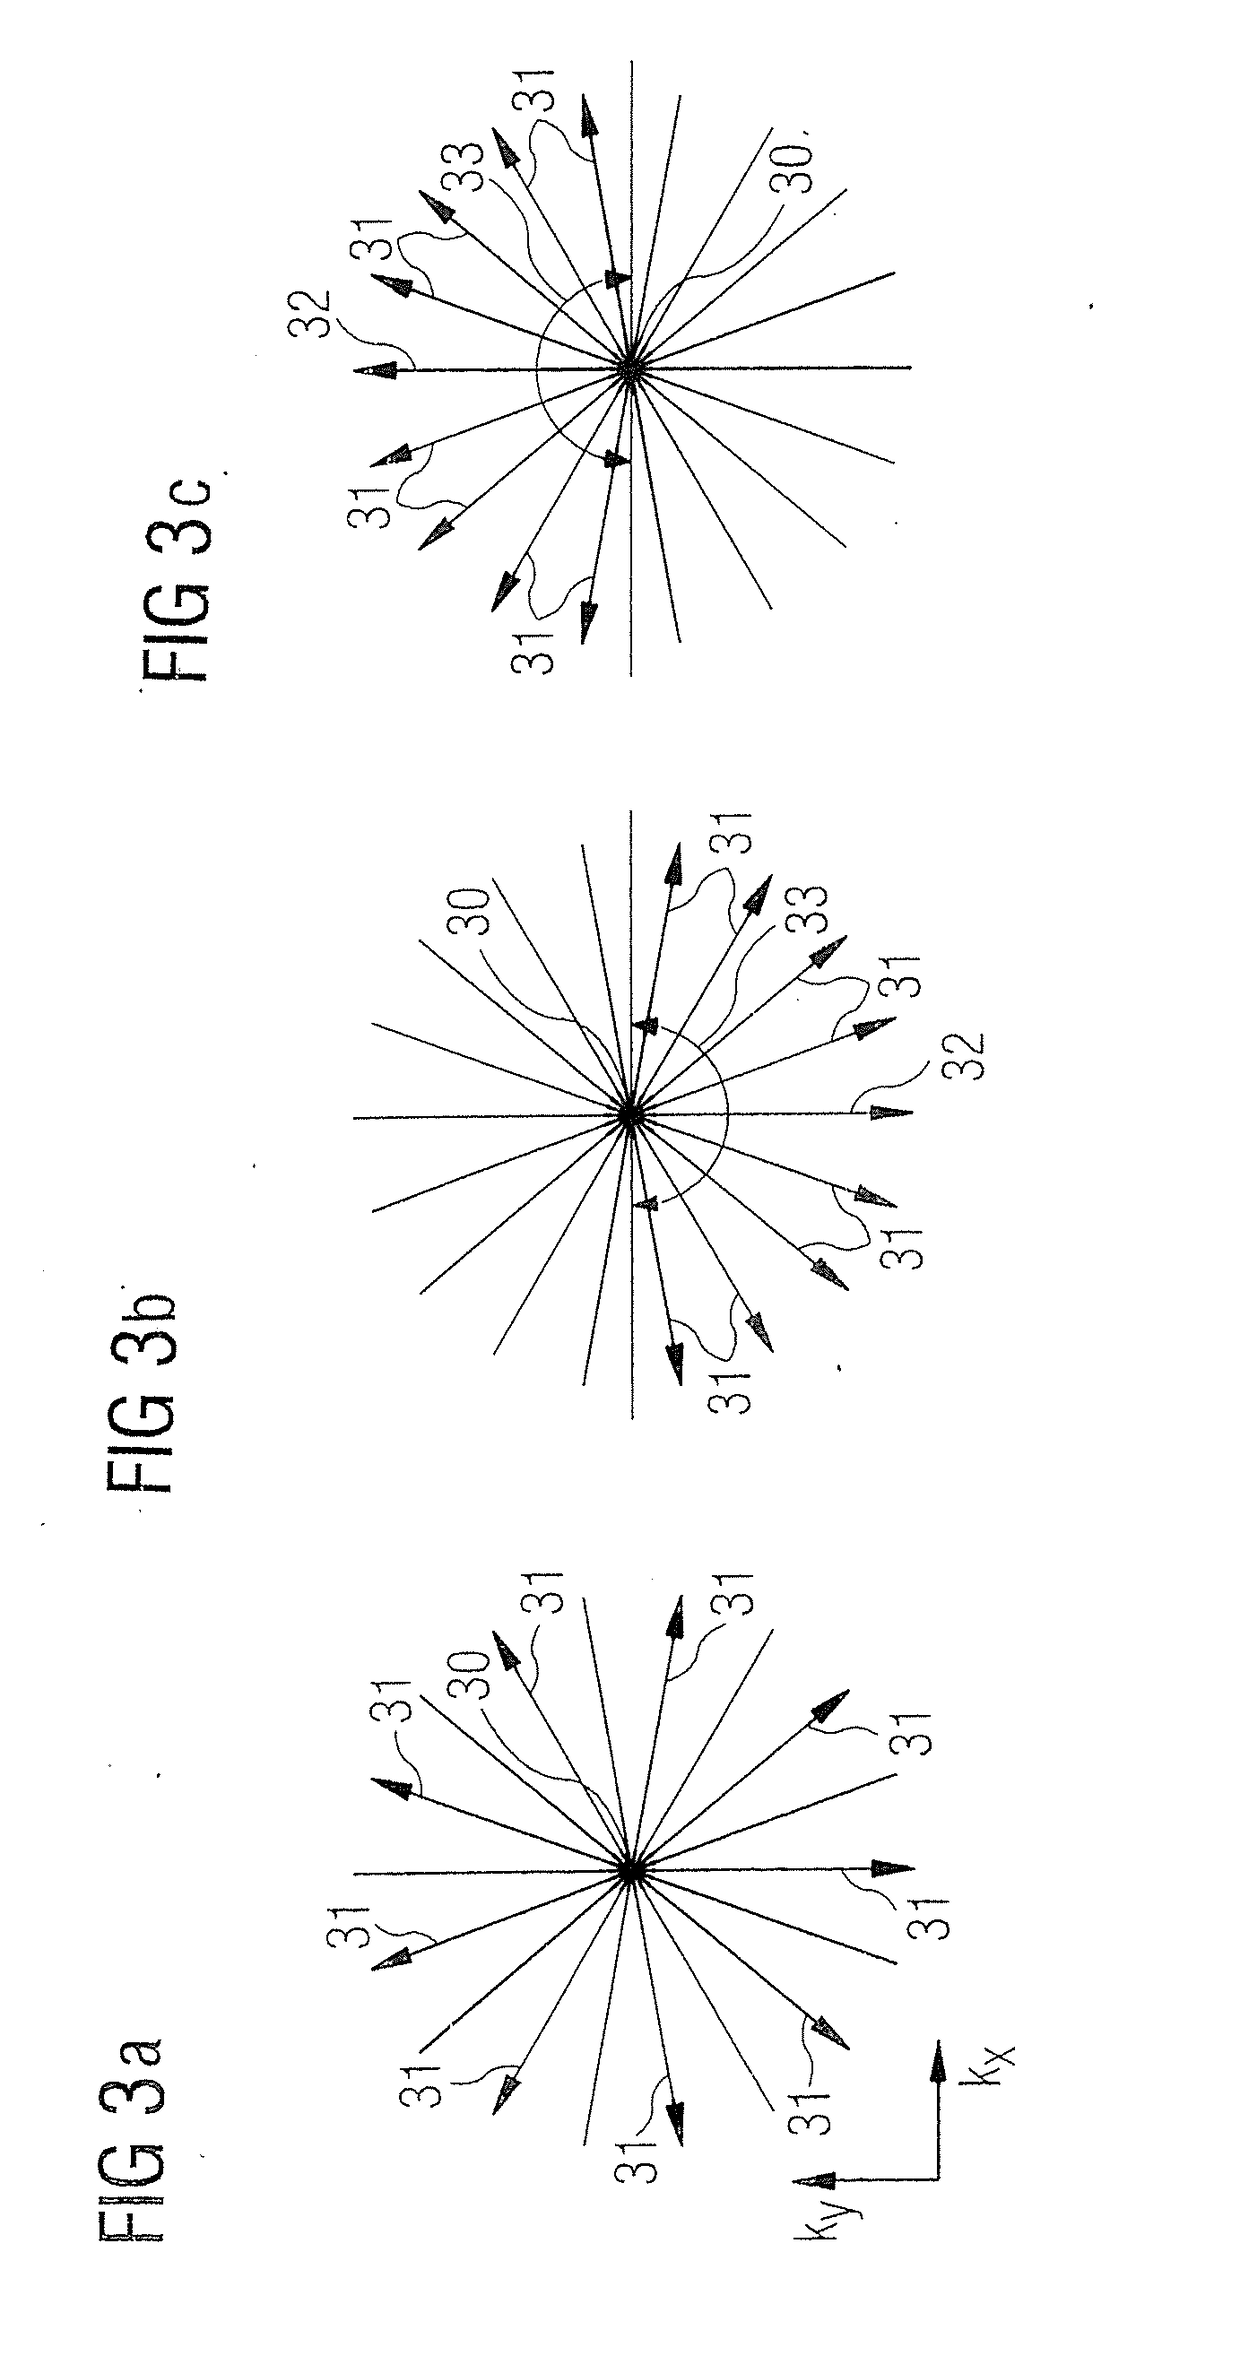 Method and apparatus for generating a magnetic resonance image with radio collection of magnetic resonance data to avoid image artifacts